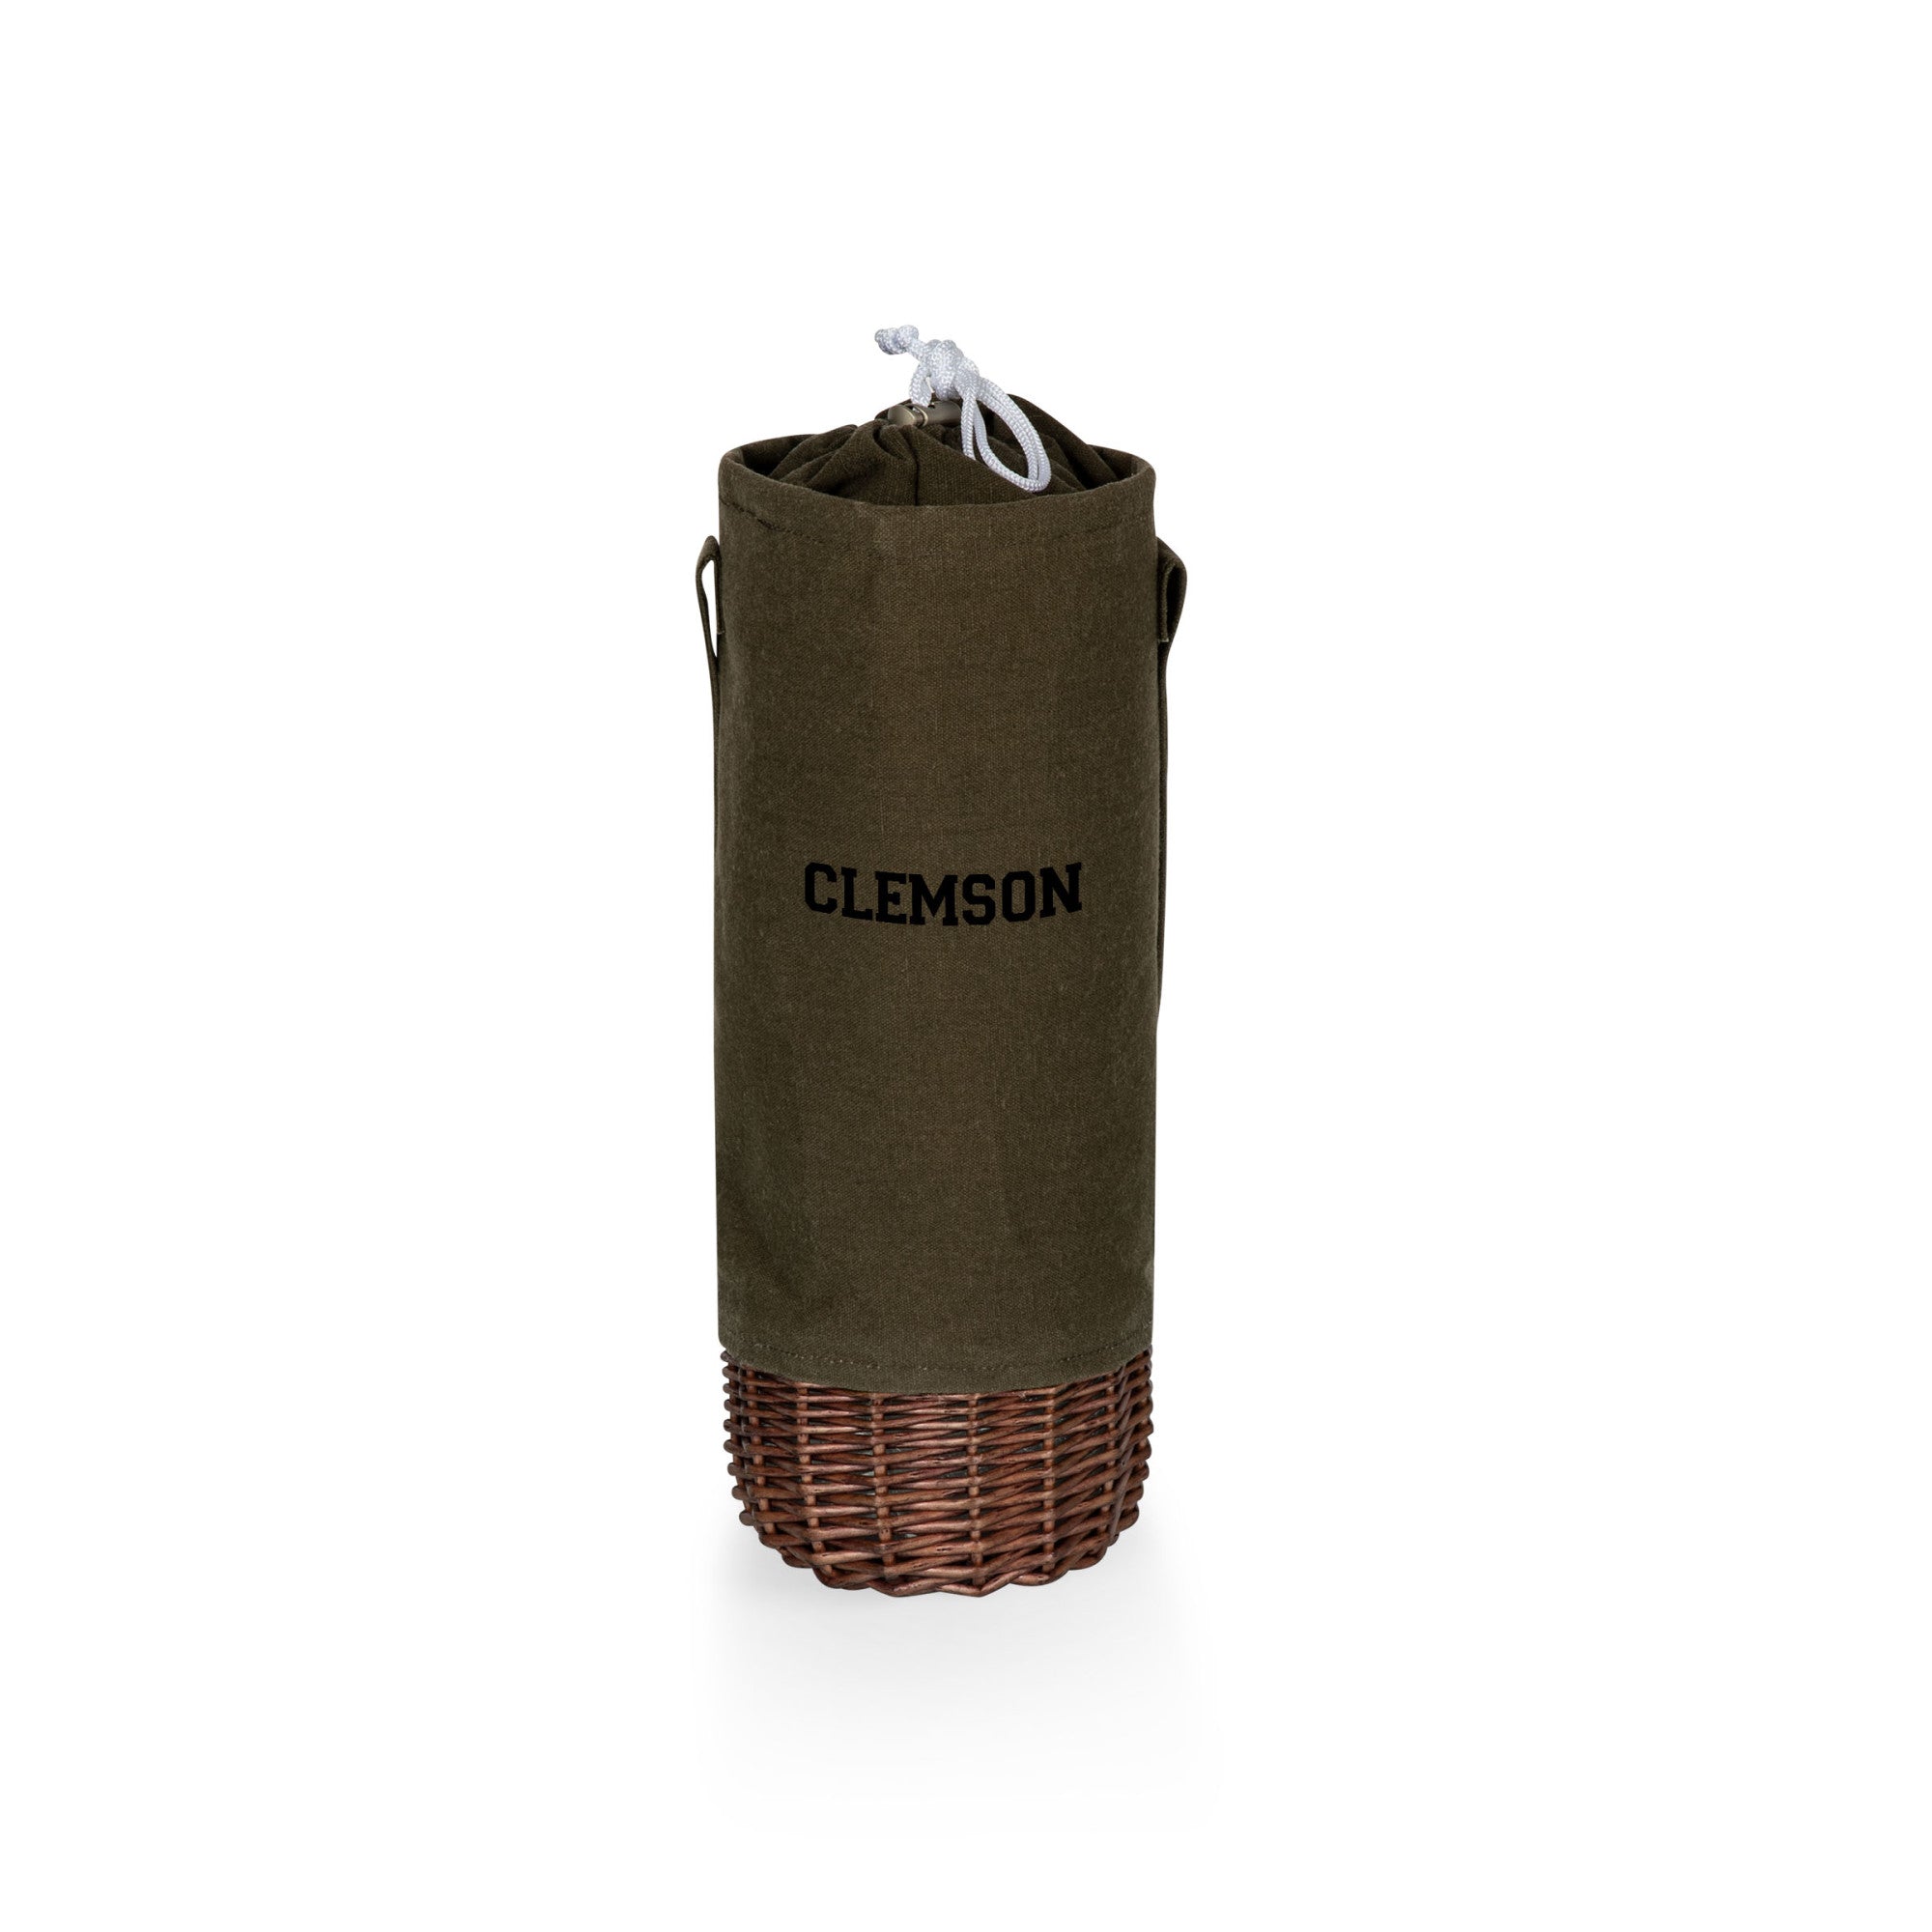 Clemson Tigers - Malbec Insulated Canvas and Willow Wine Bottle Basket